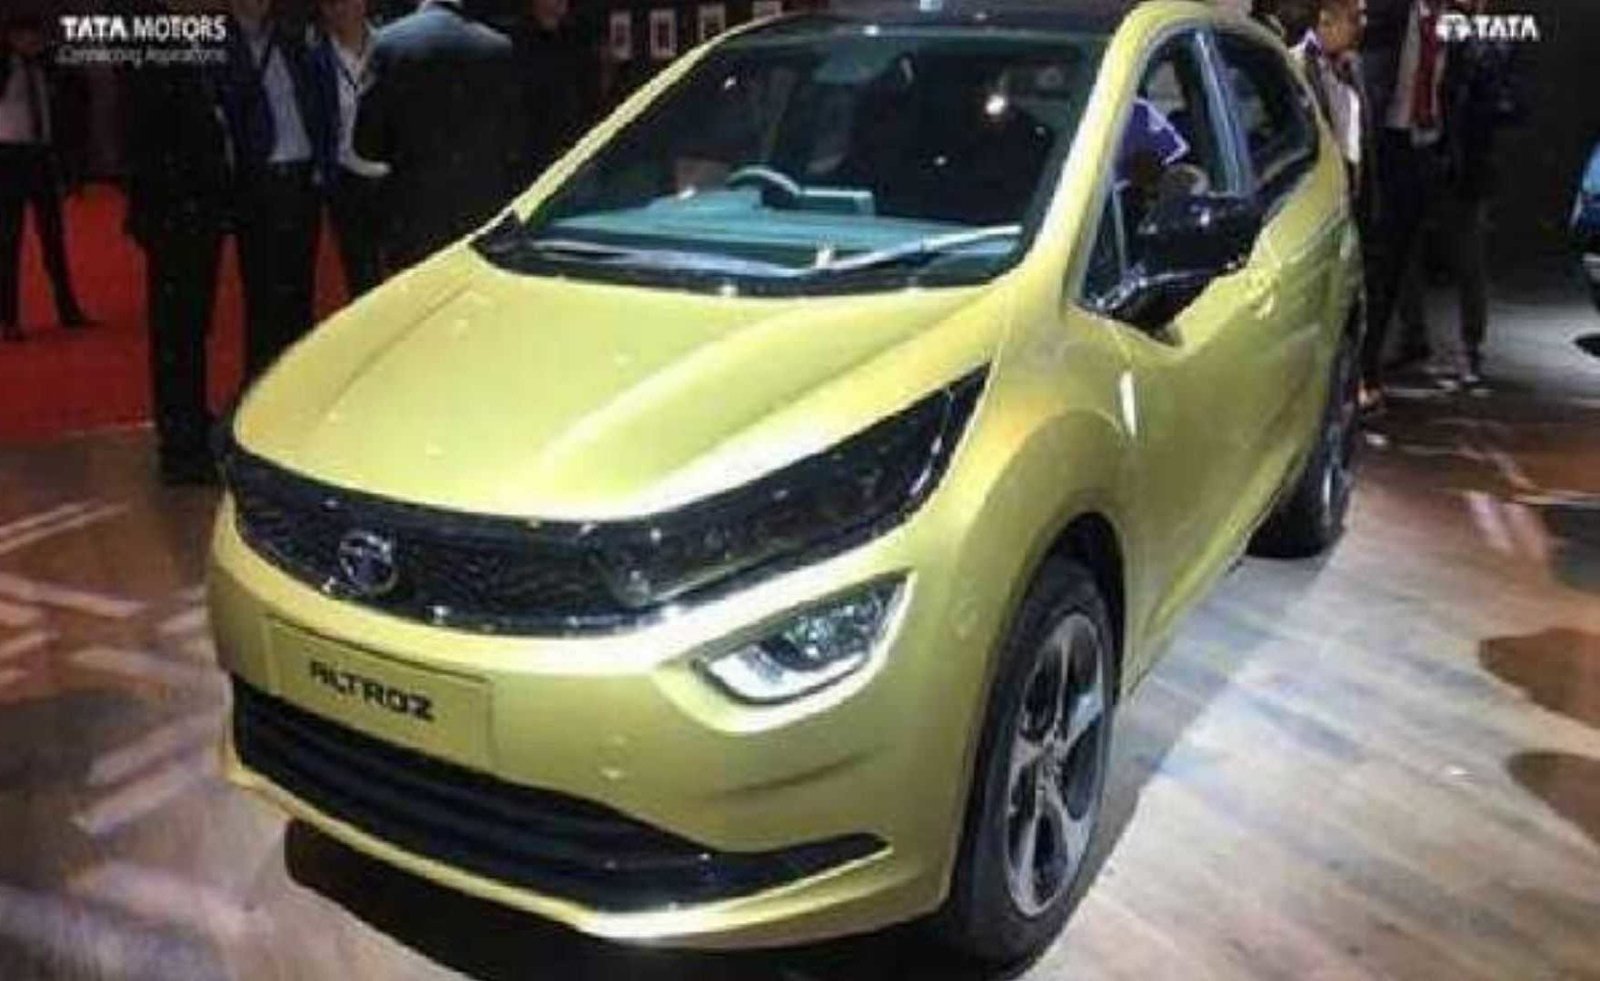 4 हॅचबॅक | Good news! TATA and Maruti's 4 Hatchback Models to Launch in the New Year